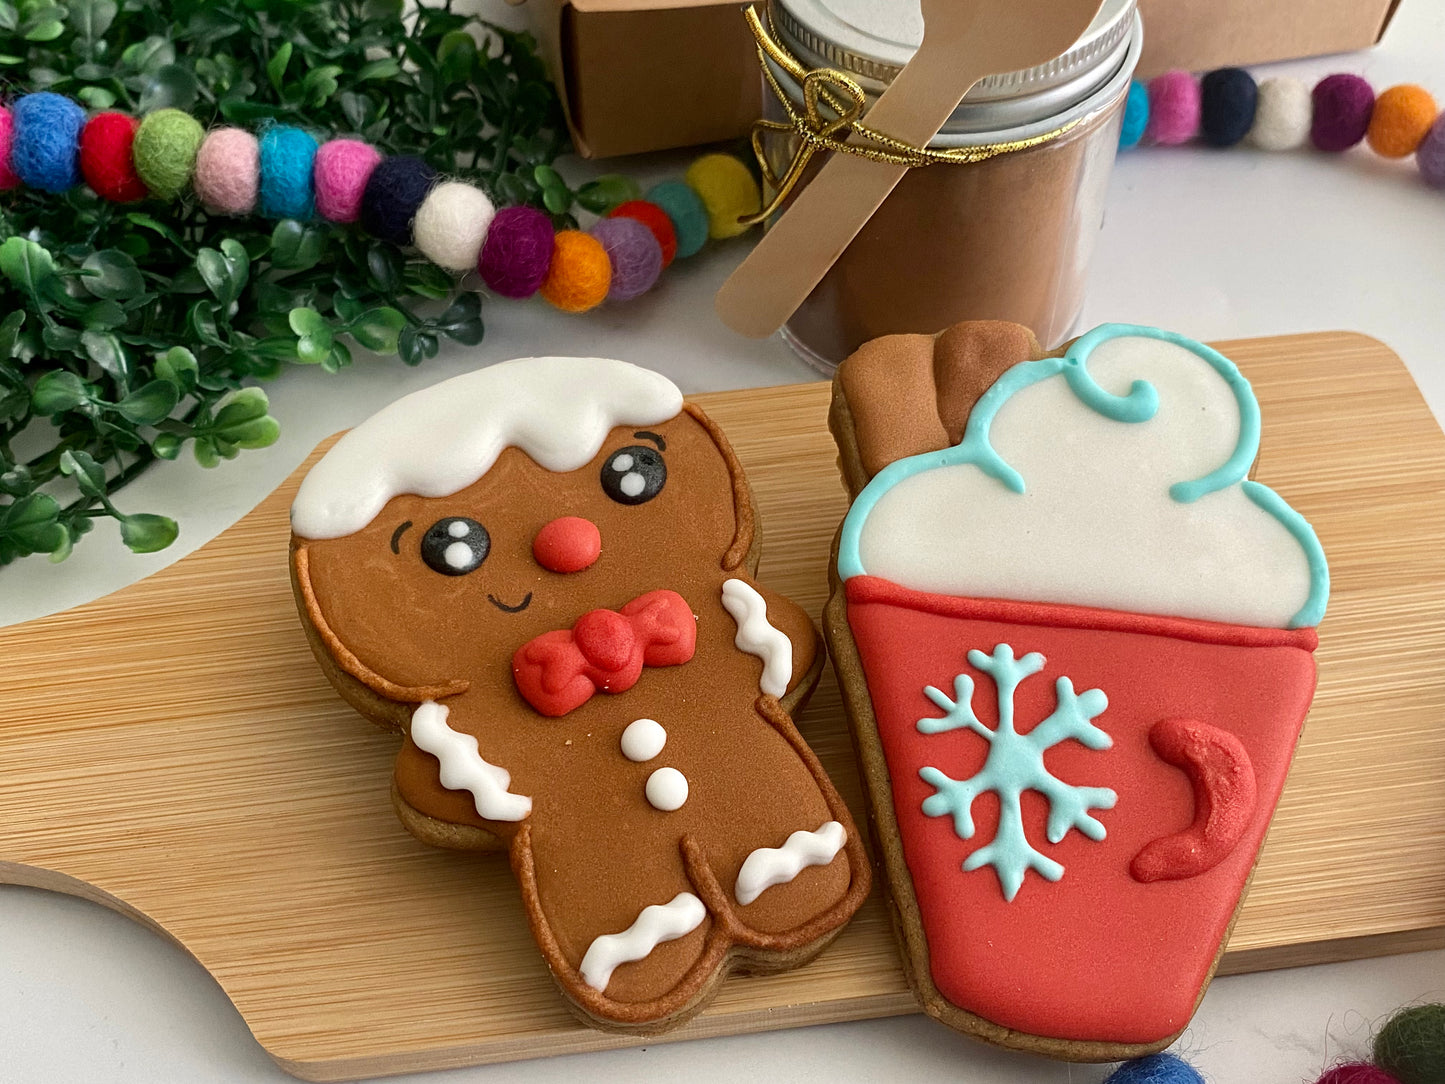 Gingerbread and Hot cocoa Mix giftset